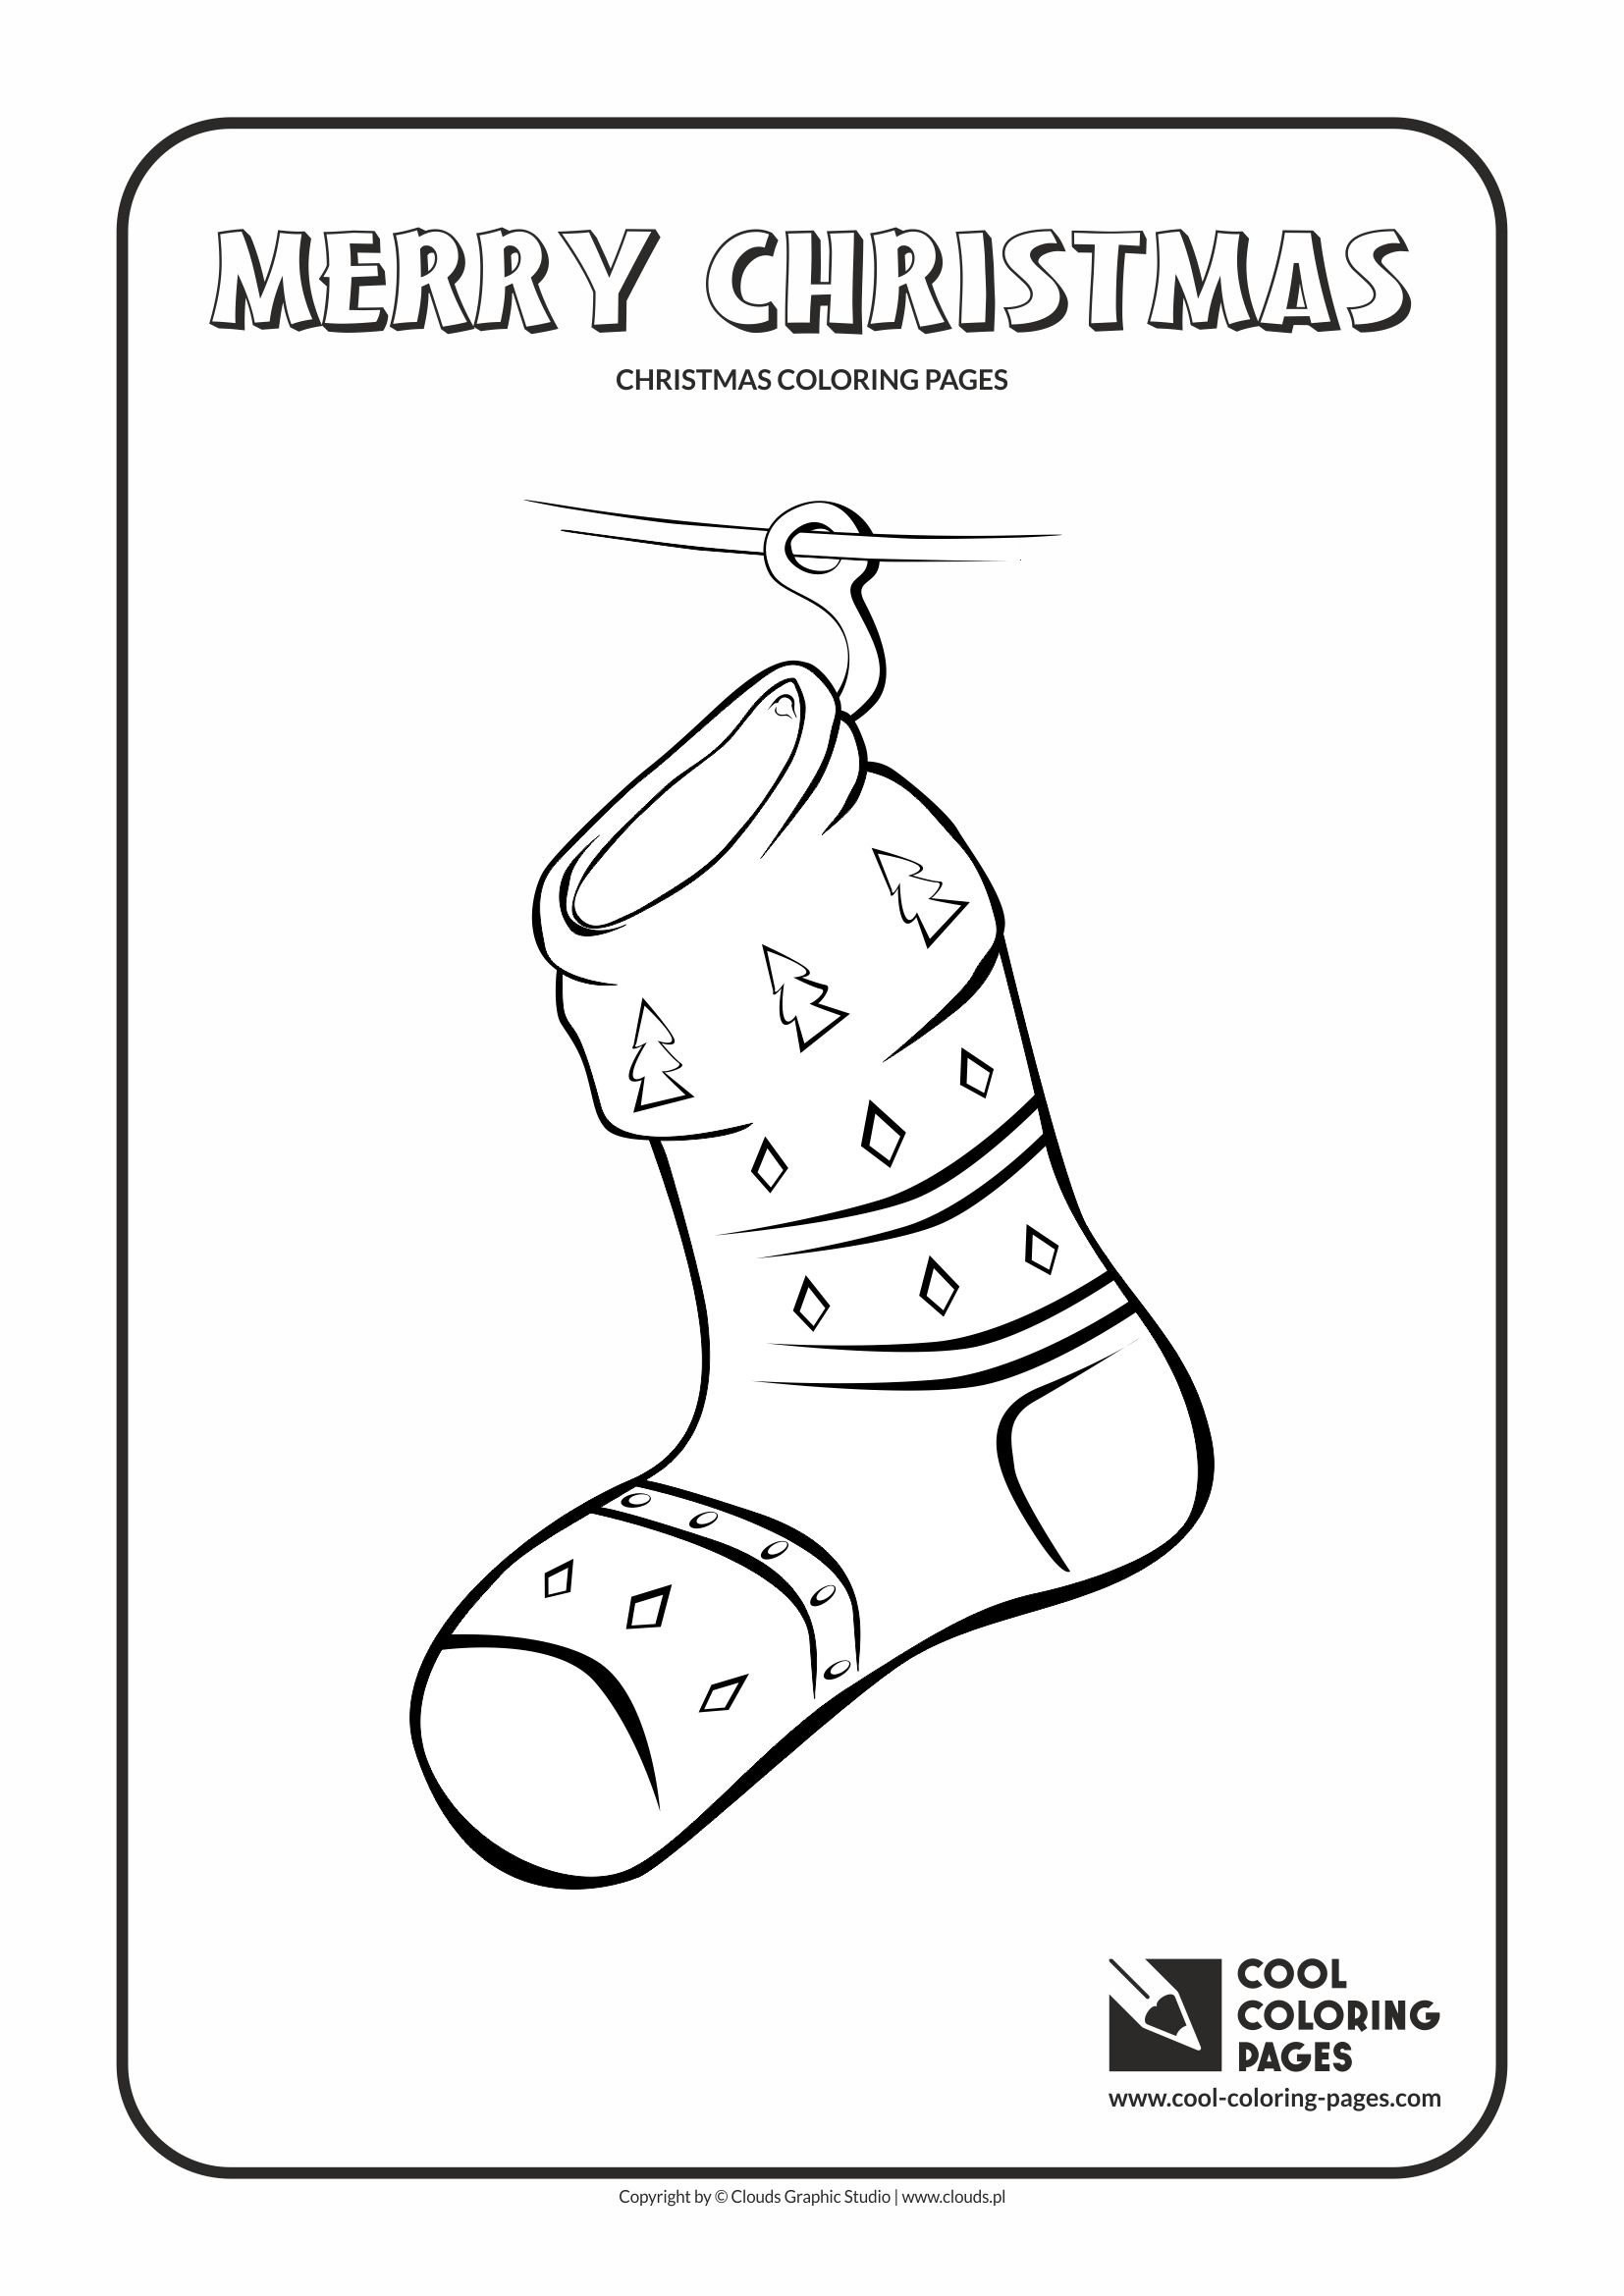 Cool Coloring Pages - Holidays / Christmas sock / Coloring page with Christmas sock